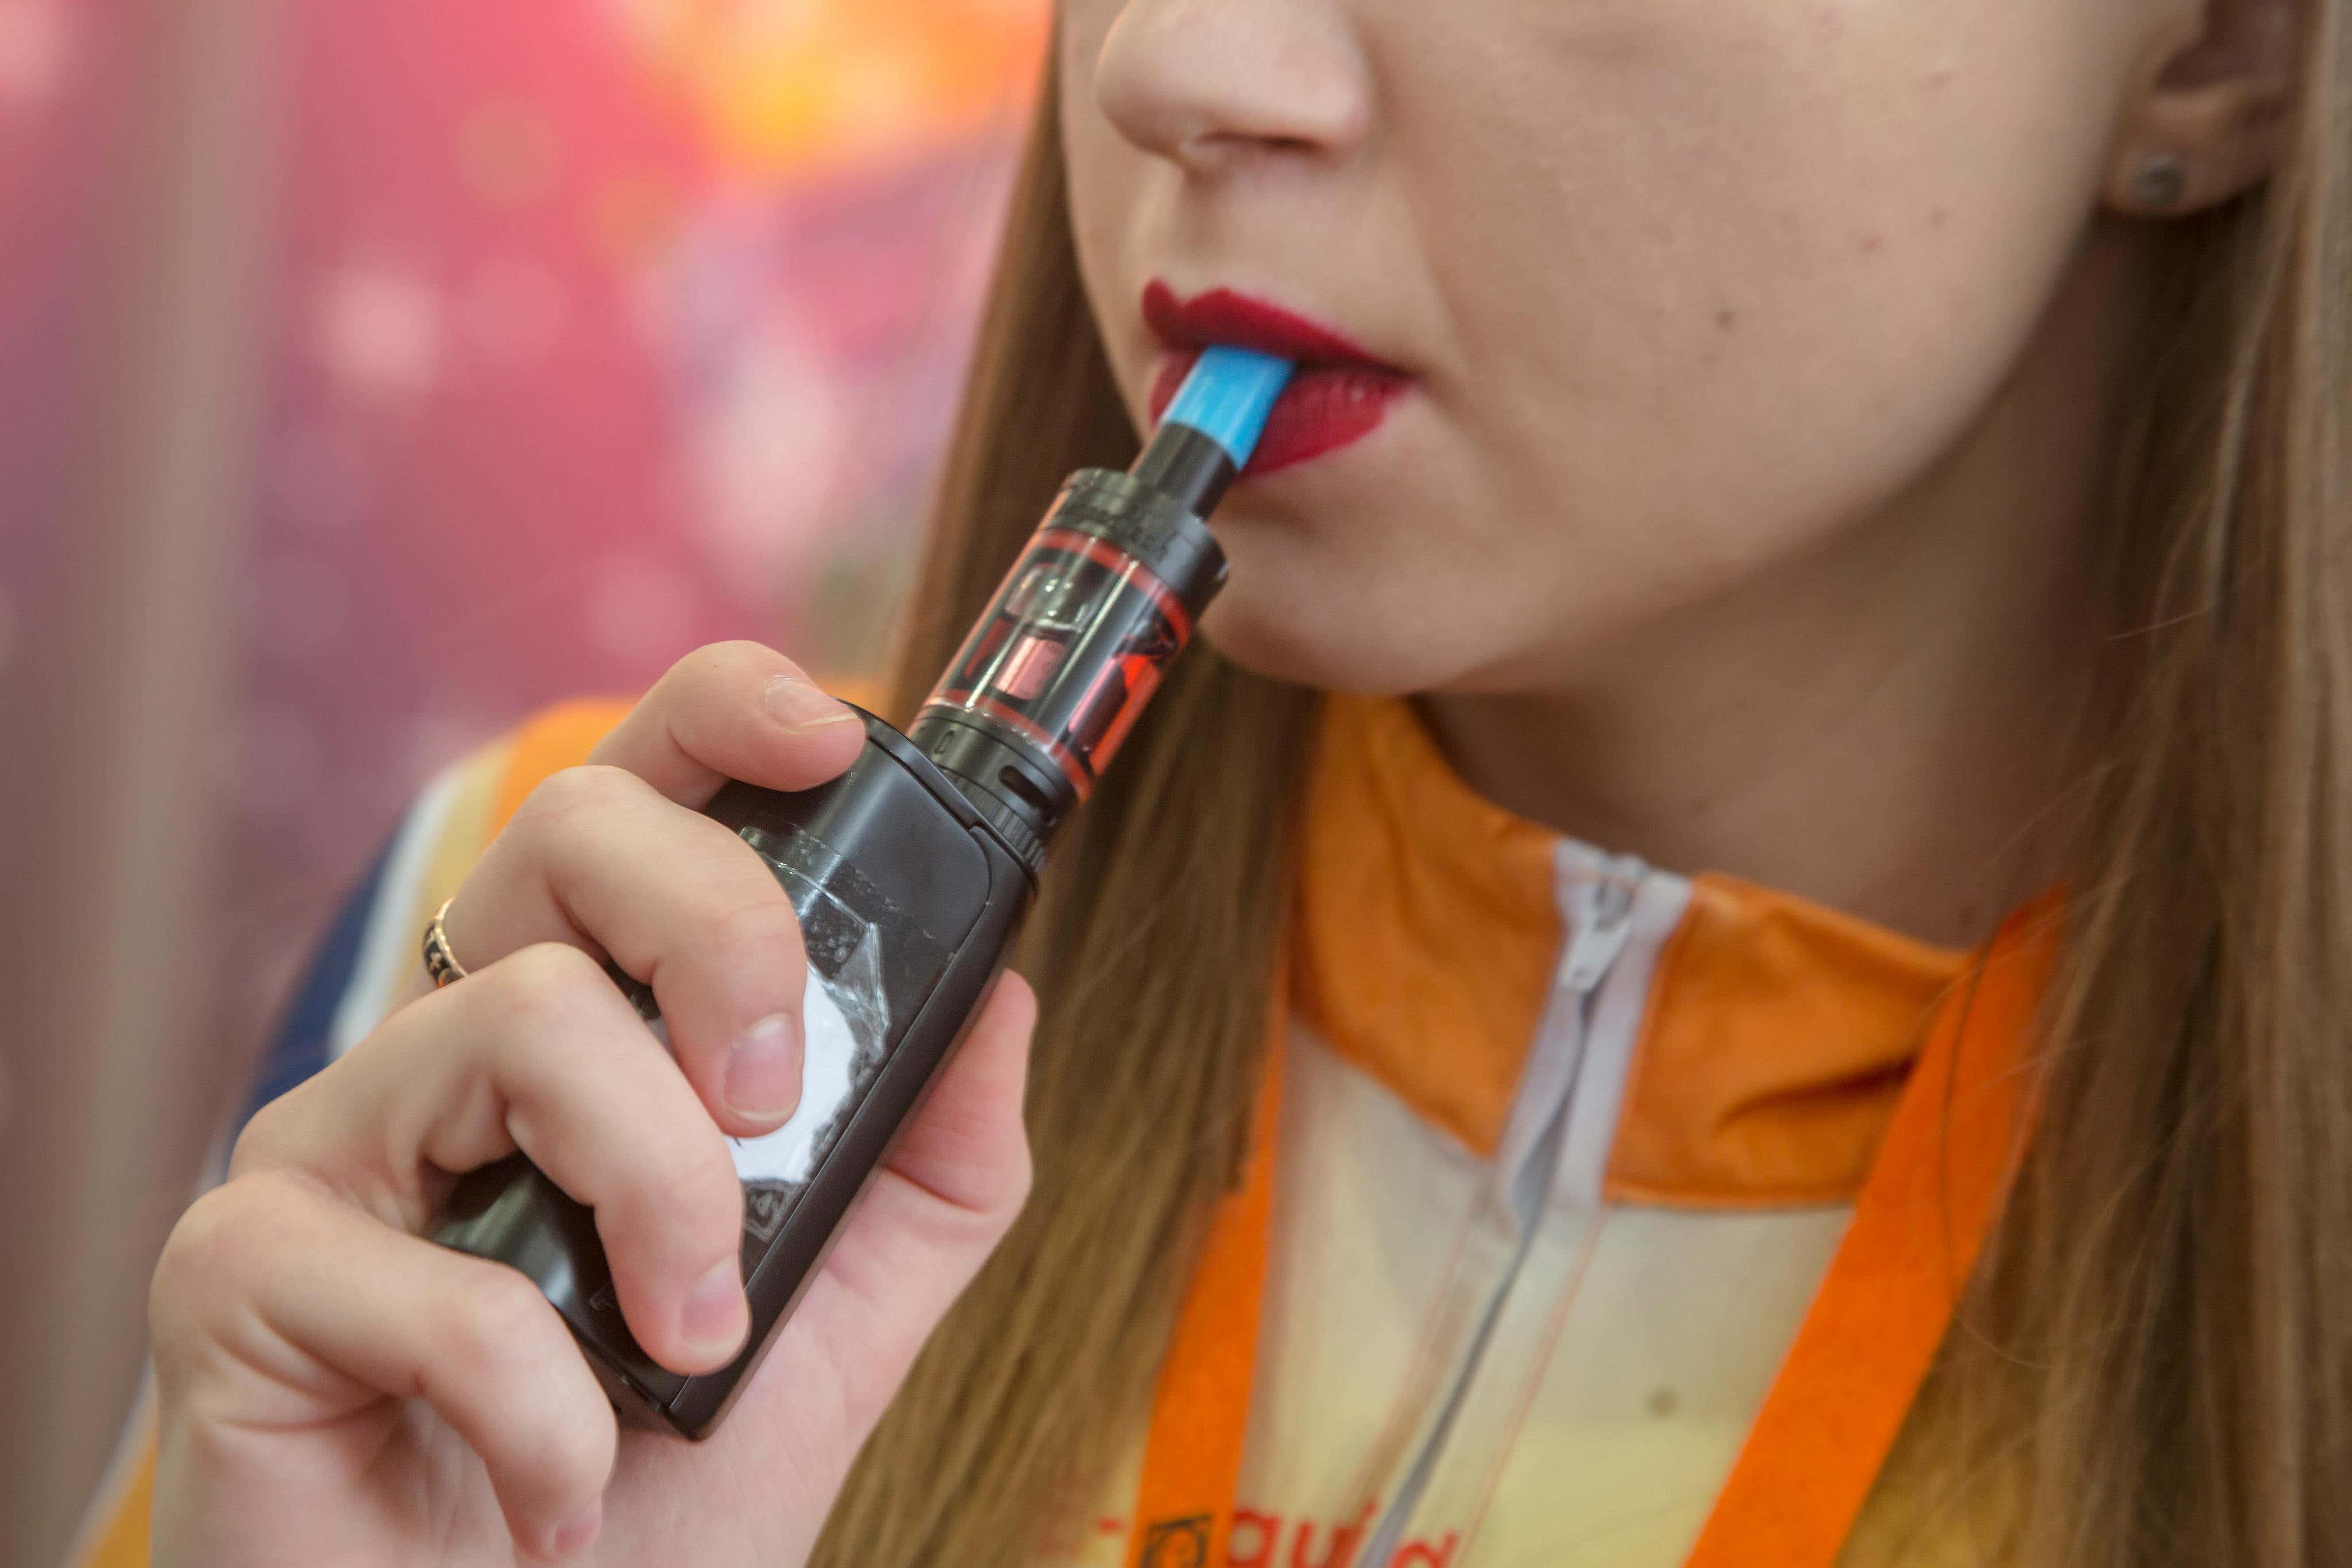 Inhaling a spice-laced vape can cause issues including chest palpitations, seizures or suicidal thoughts